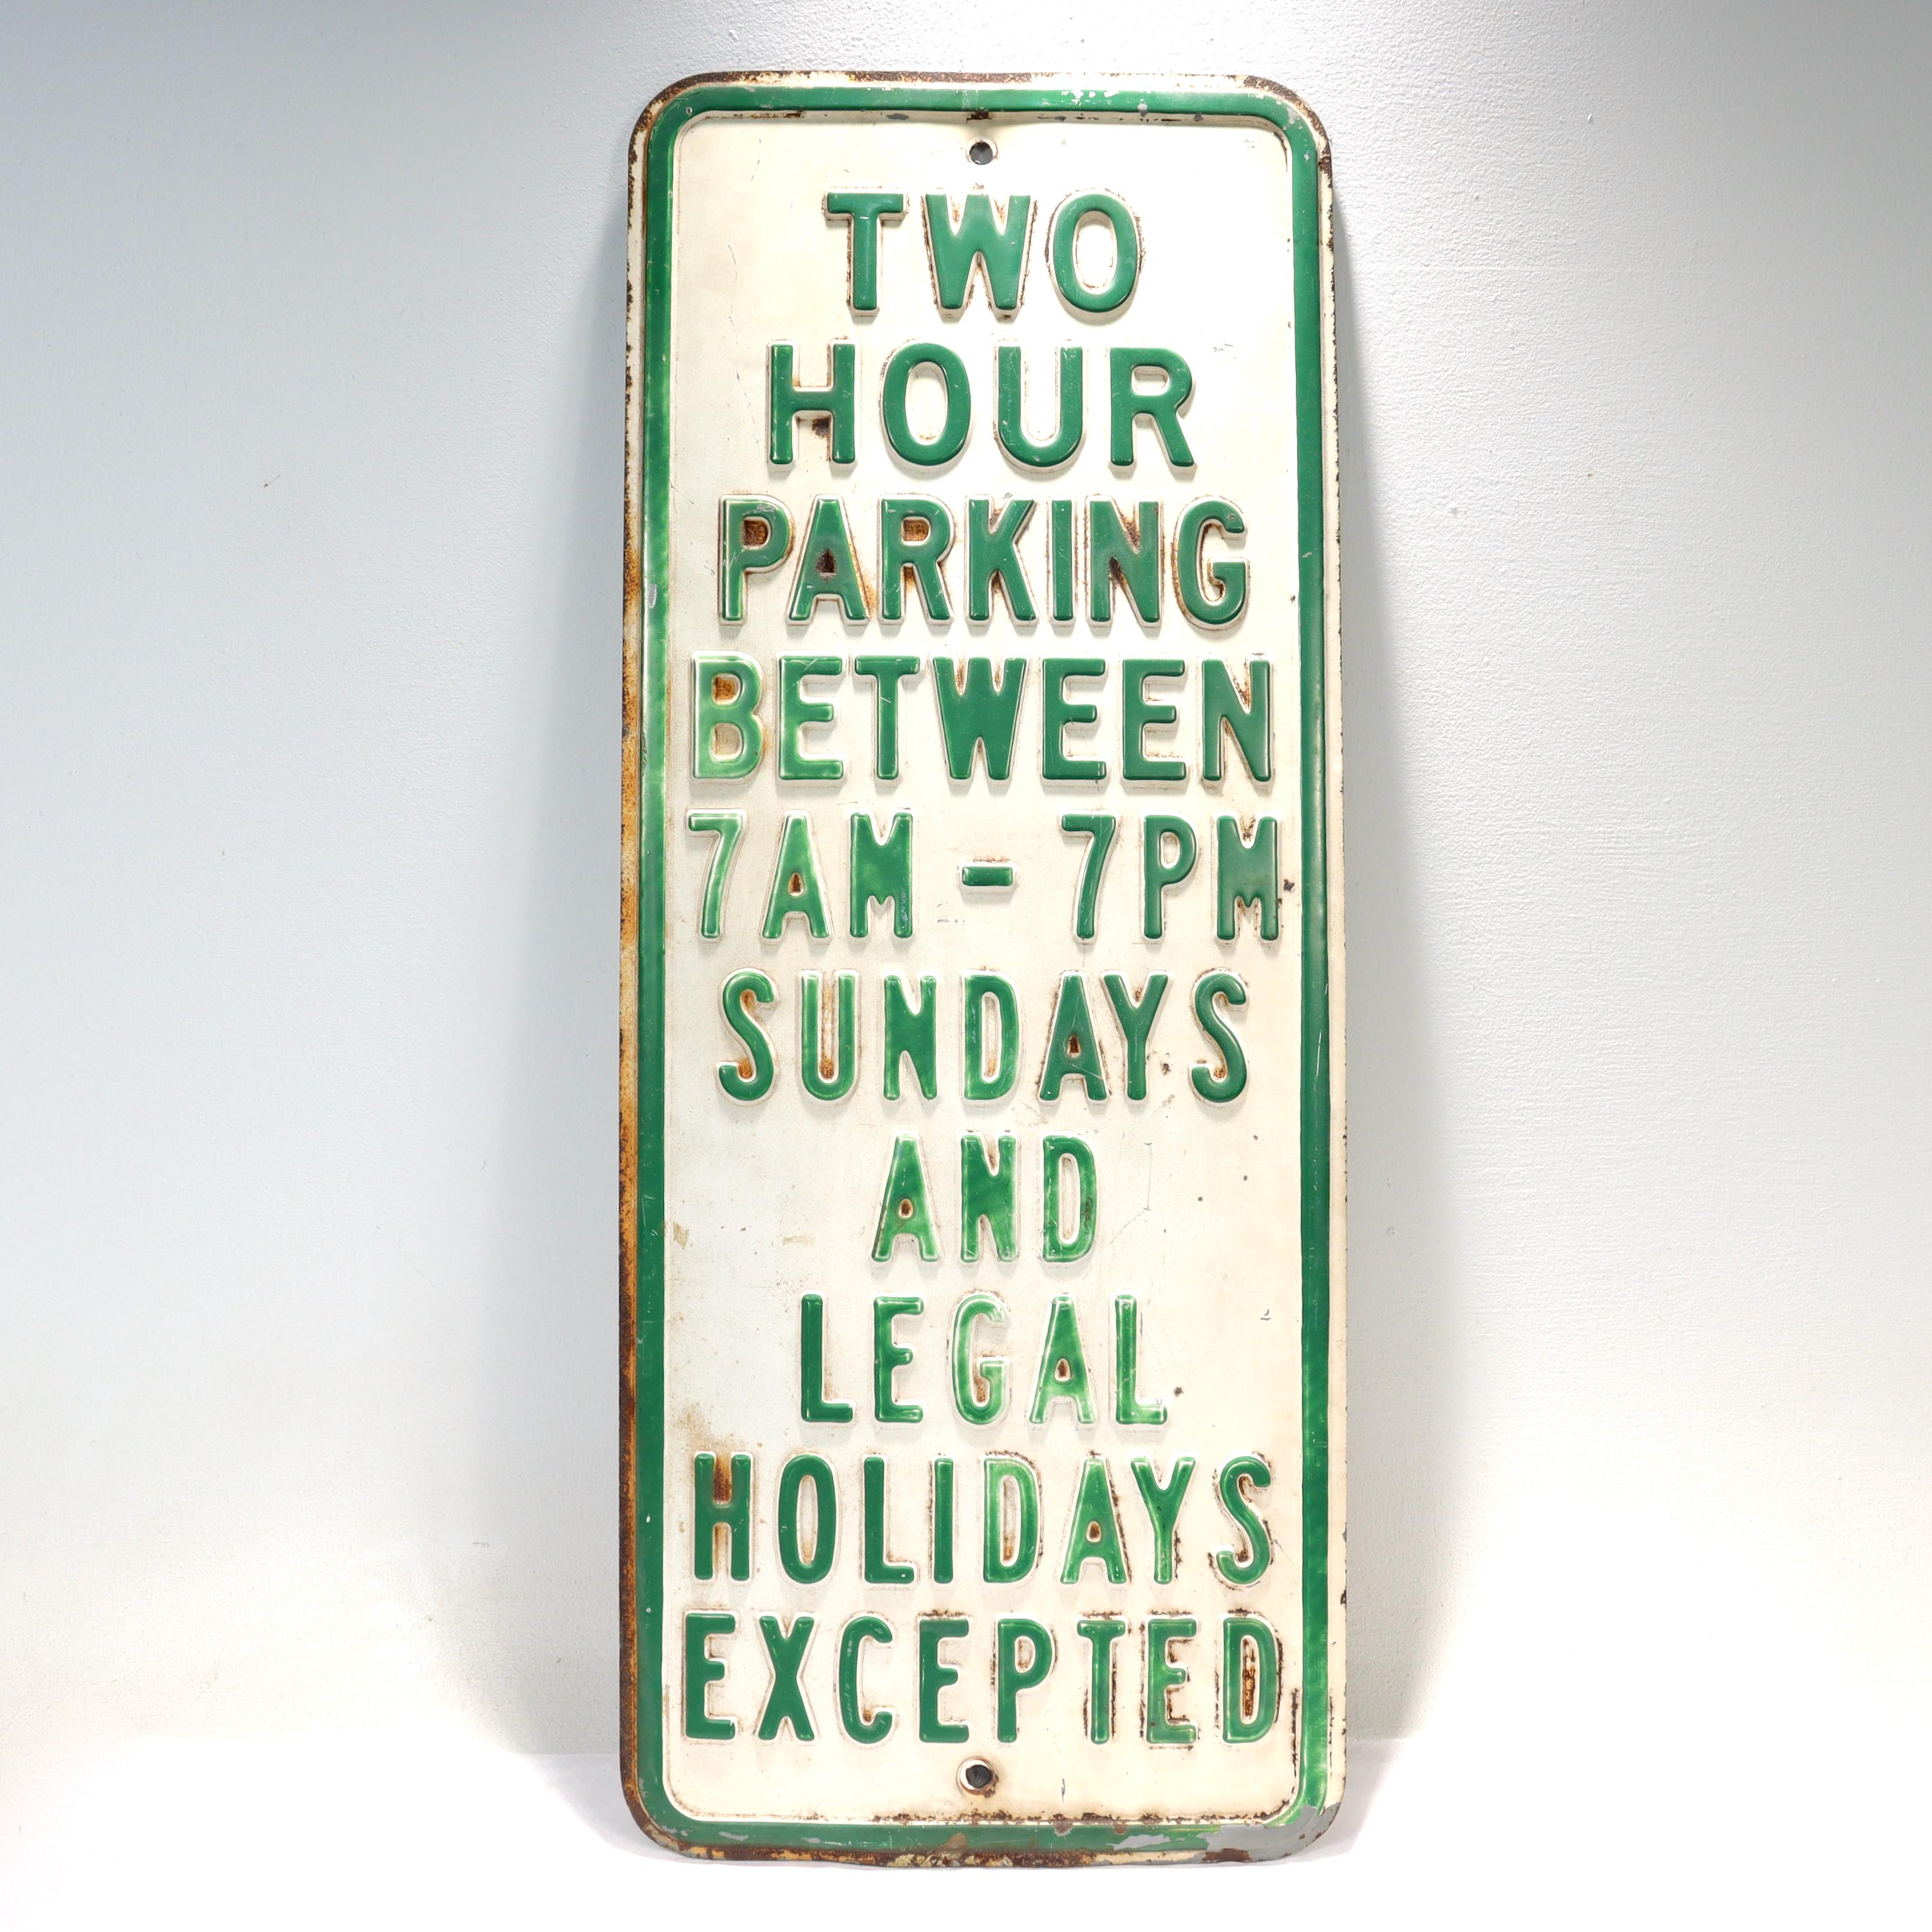 A fine vintage traffic or street sign.

With green text and border on a white ground.

The text reads: 

'TWO HOUR PARKING BETWEEN 7AM - 7PM SUNDAYS AND LEGAL HOLIDAYS EXCEPTED'. 

Simply a great vintage sign!

Date:
20th